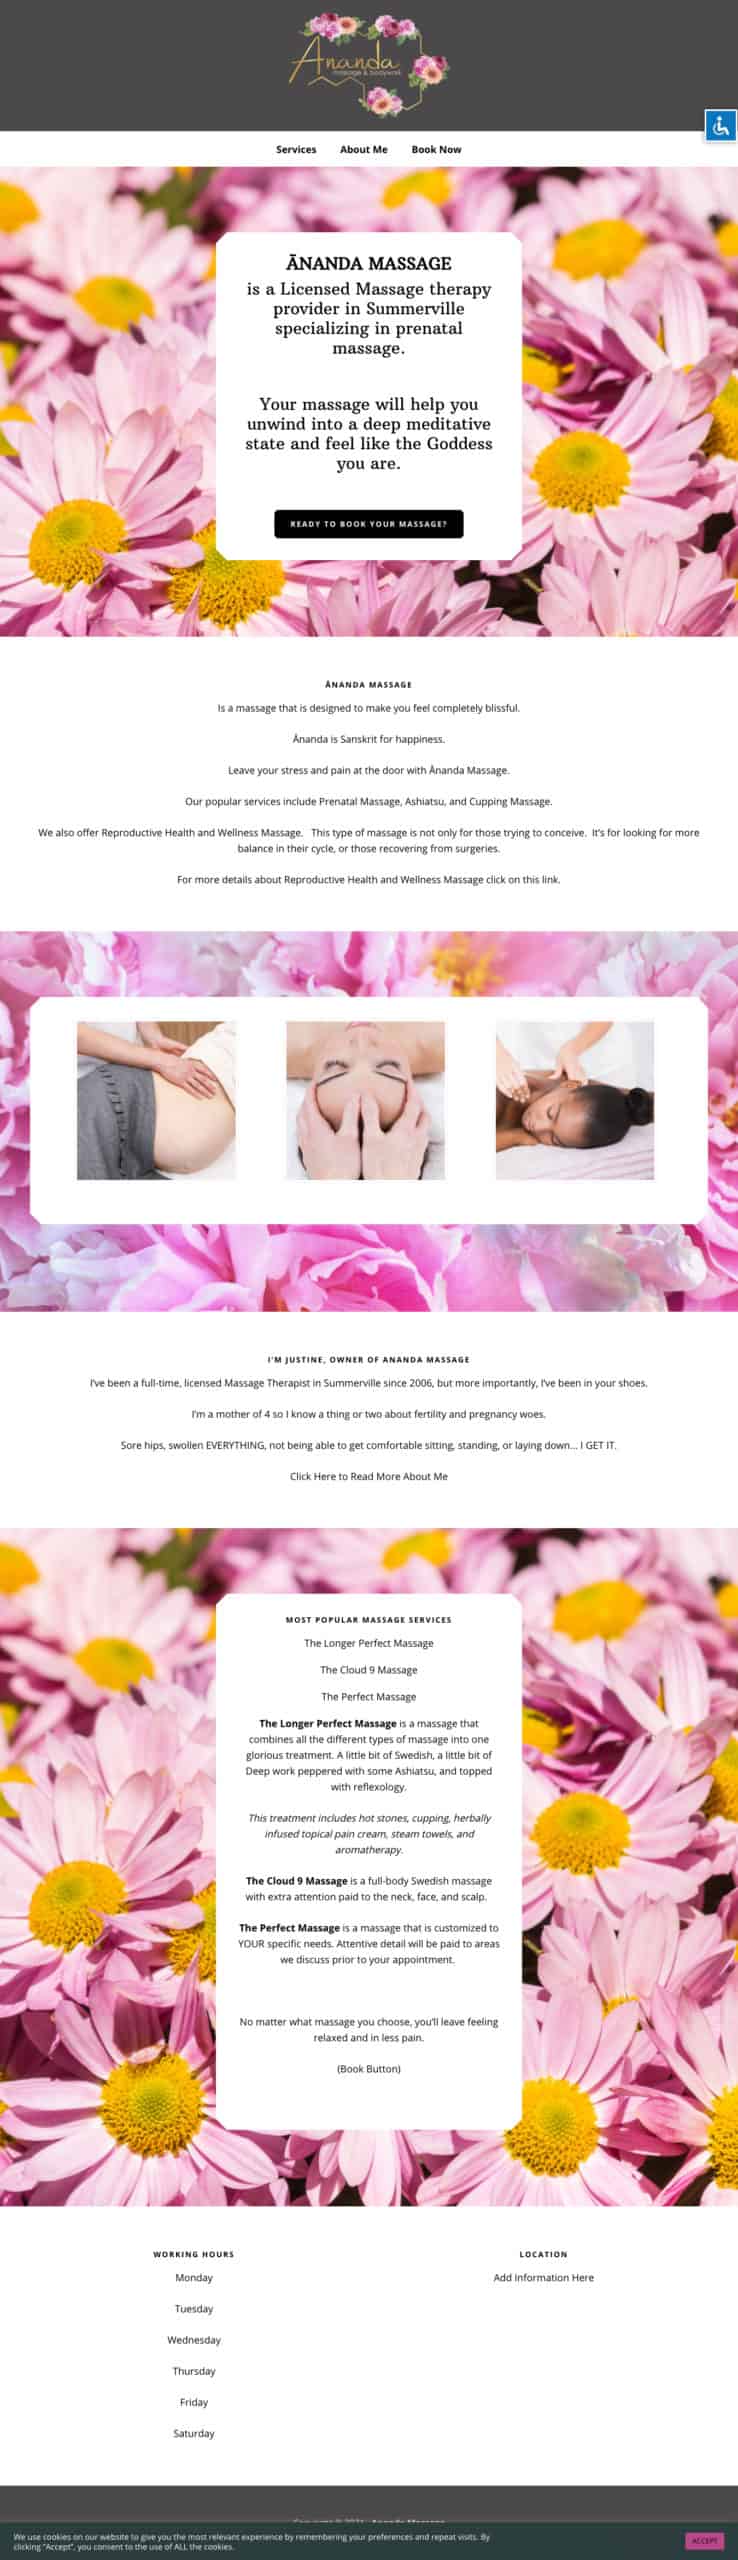 Image Home Page of Ananda Massage